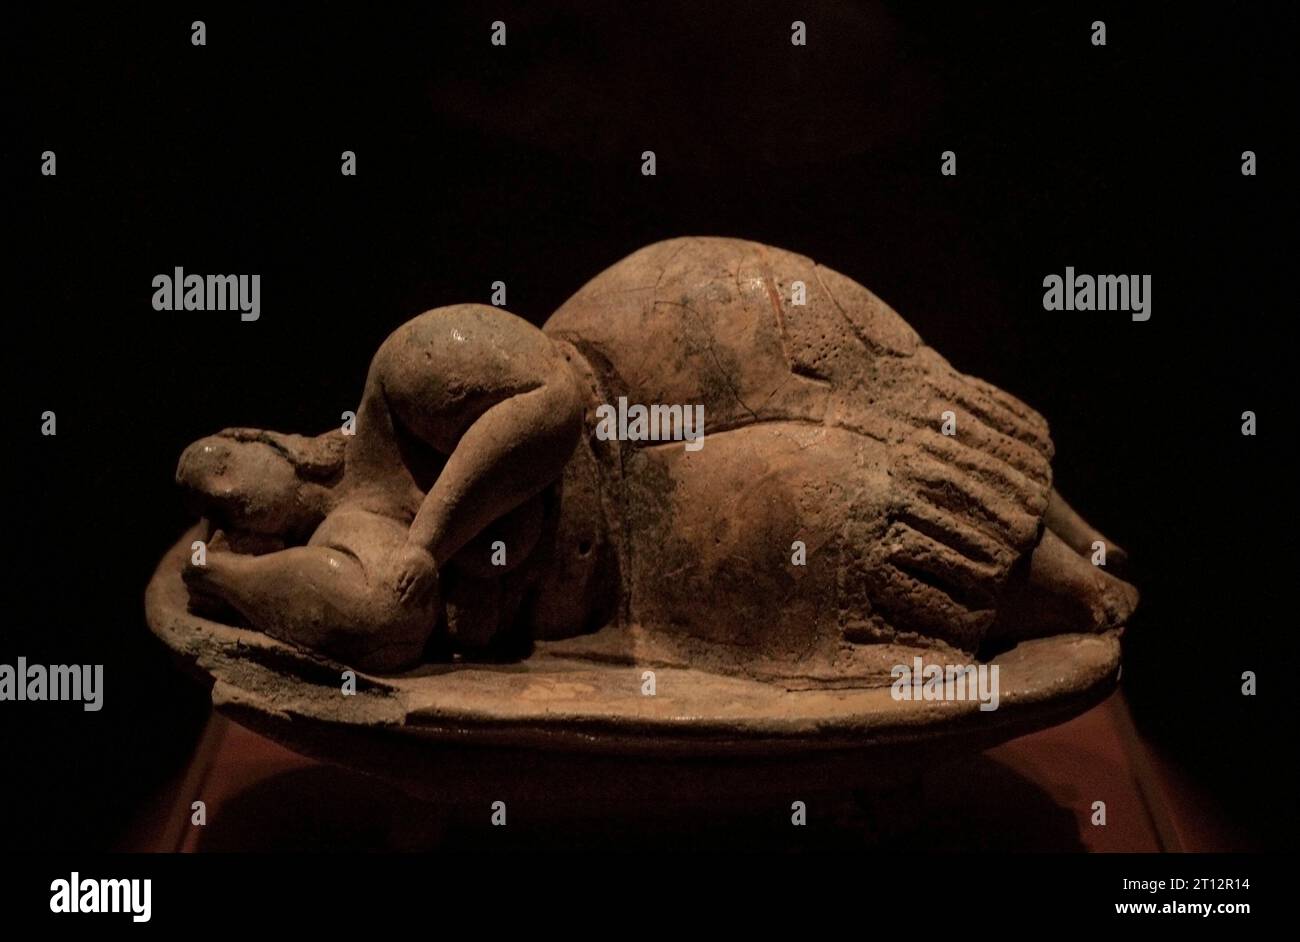 Neolithic Period. Temple Period (3600 to 2500 BC). The Sleeping Lady. Clay statuette found in a burial chamber in the Hypogeum of Hal Saflieni, Malta. Dated ca. 3000 BC. National Museum of Archaeology. Valletta. Malta. Stock Photo